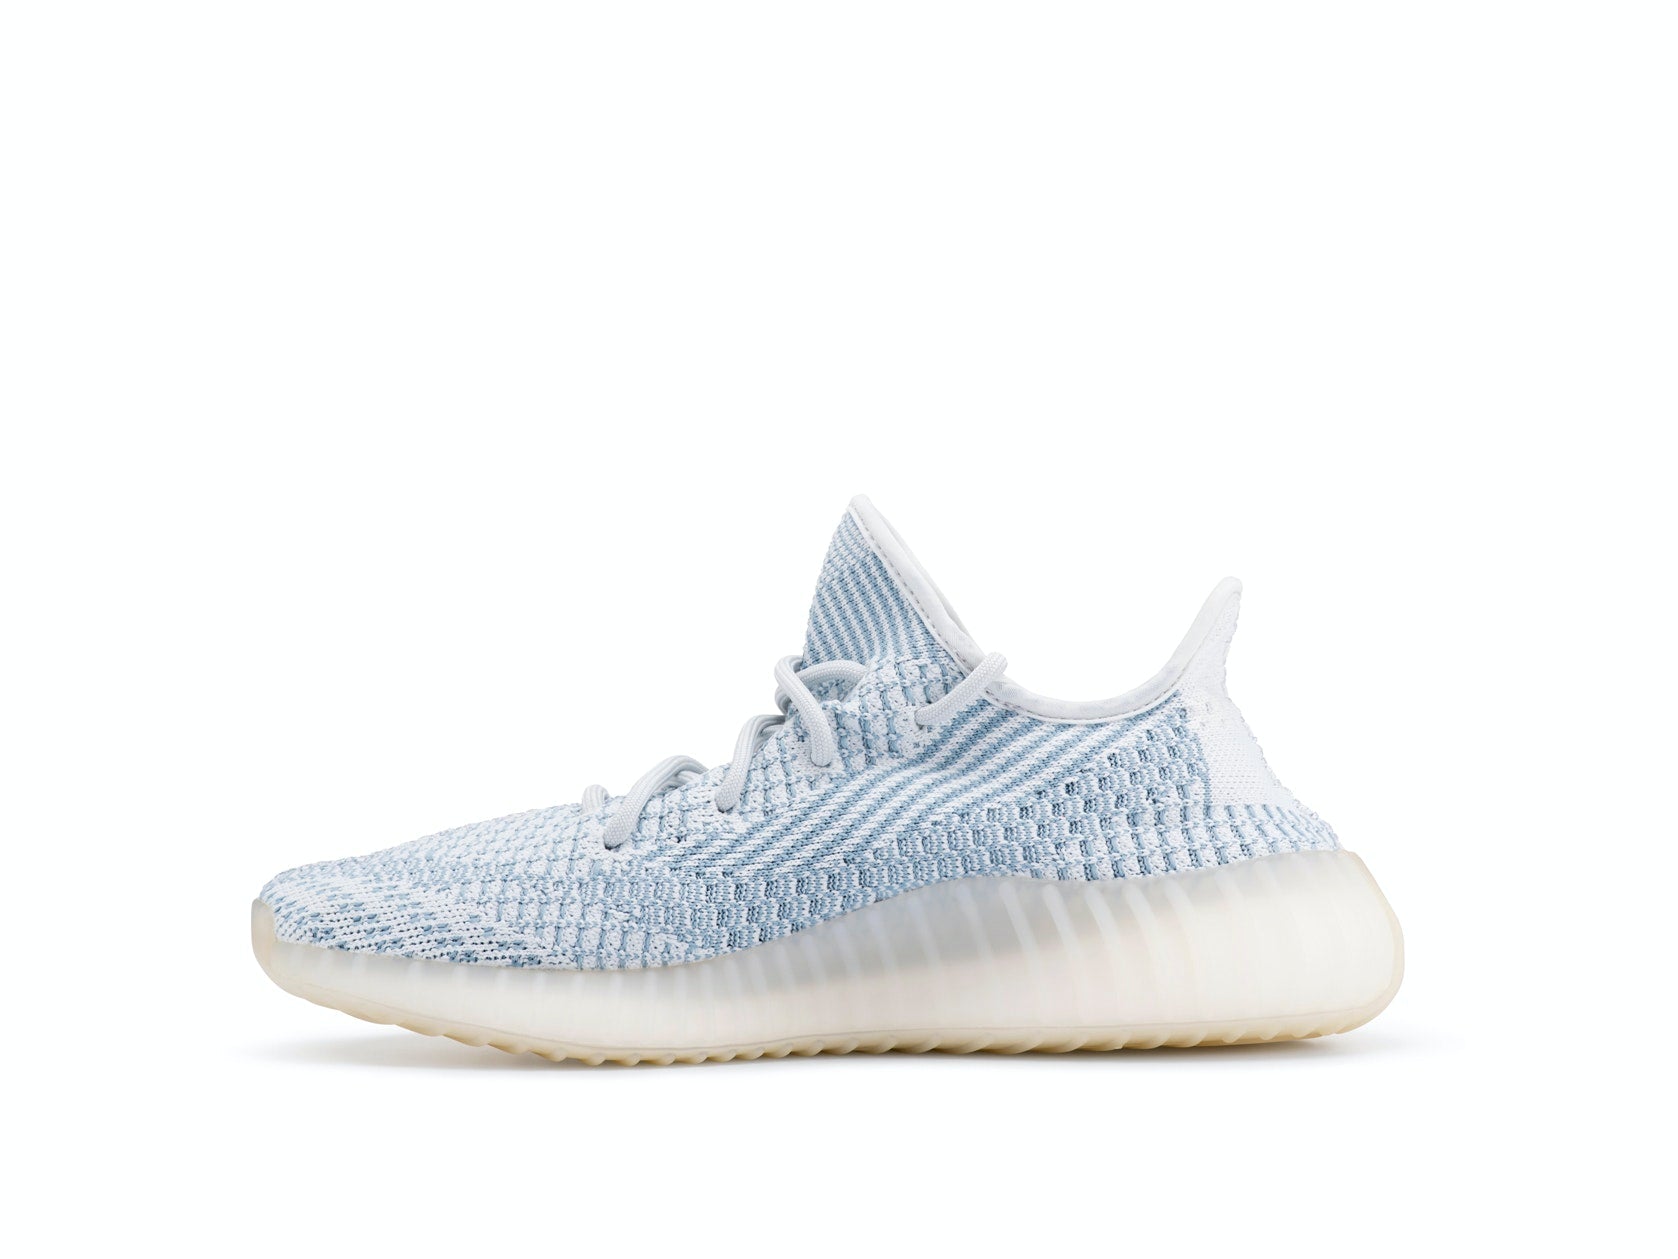 Double Boxed  550.00 adidas Yeezy Boost 350 V2 Cloud White (Non-Reflective) Double Boxed